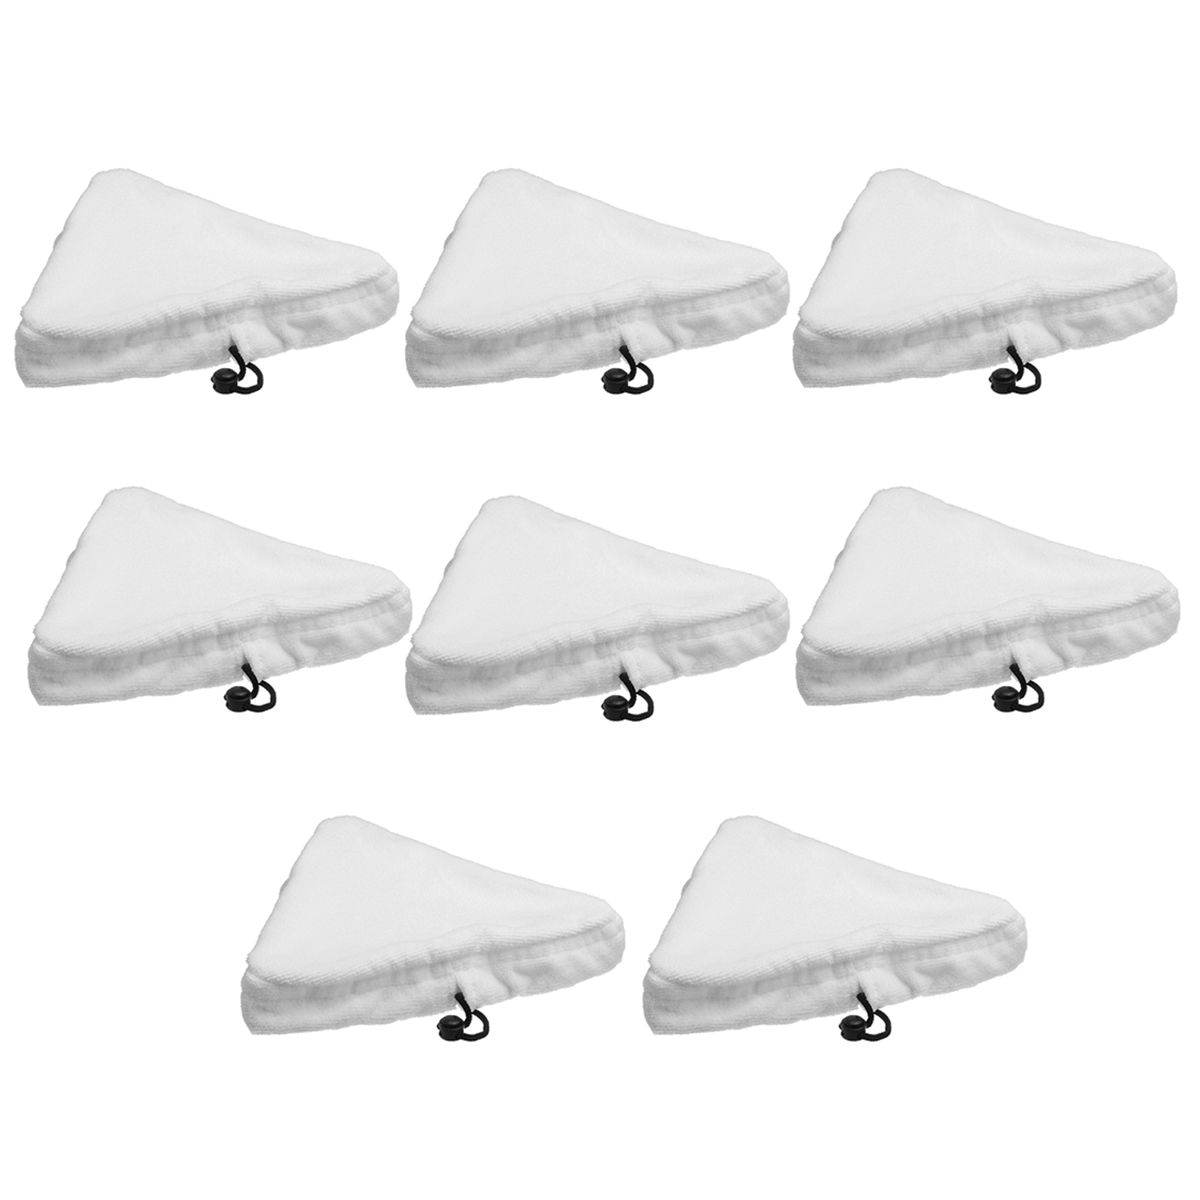 8Pcs-Steam-Cleaner-Mop-Pads-Replacement-Clothes-Micro-Fibre-Washer-Cleaning-1437035